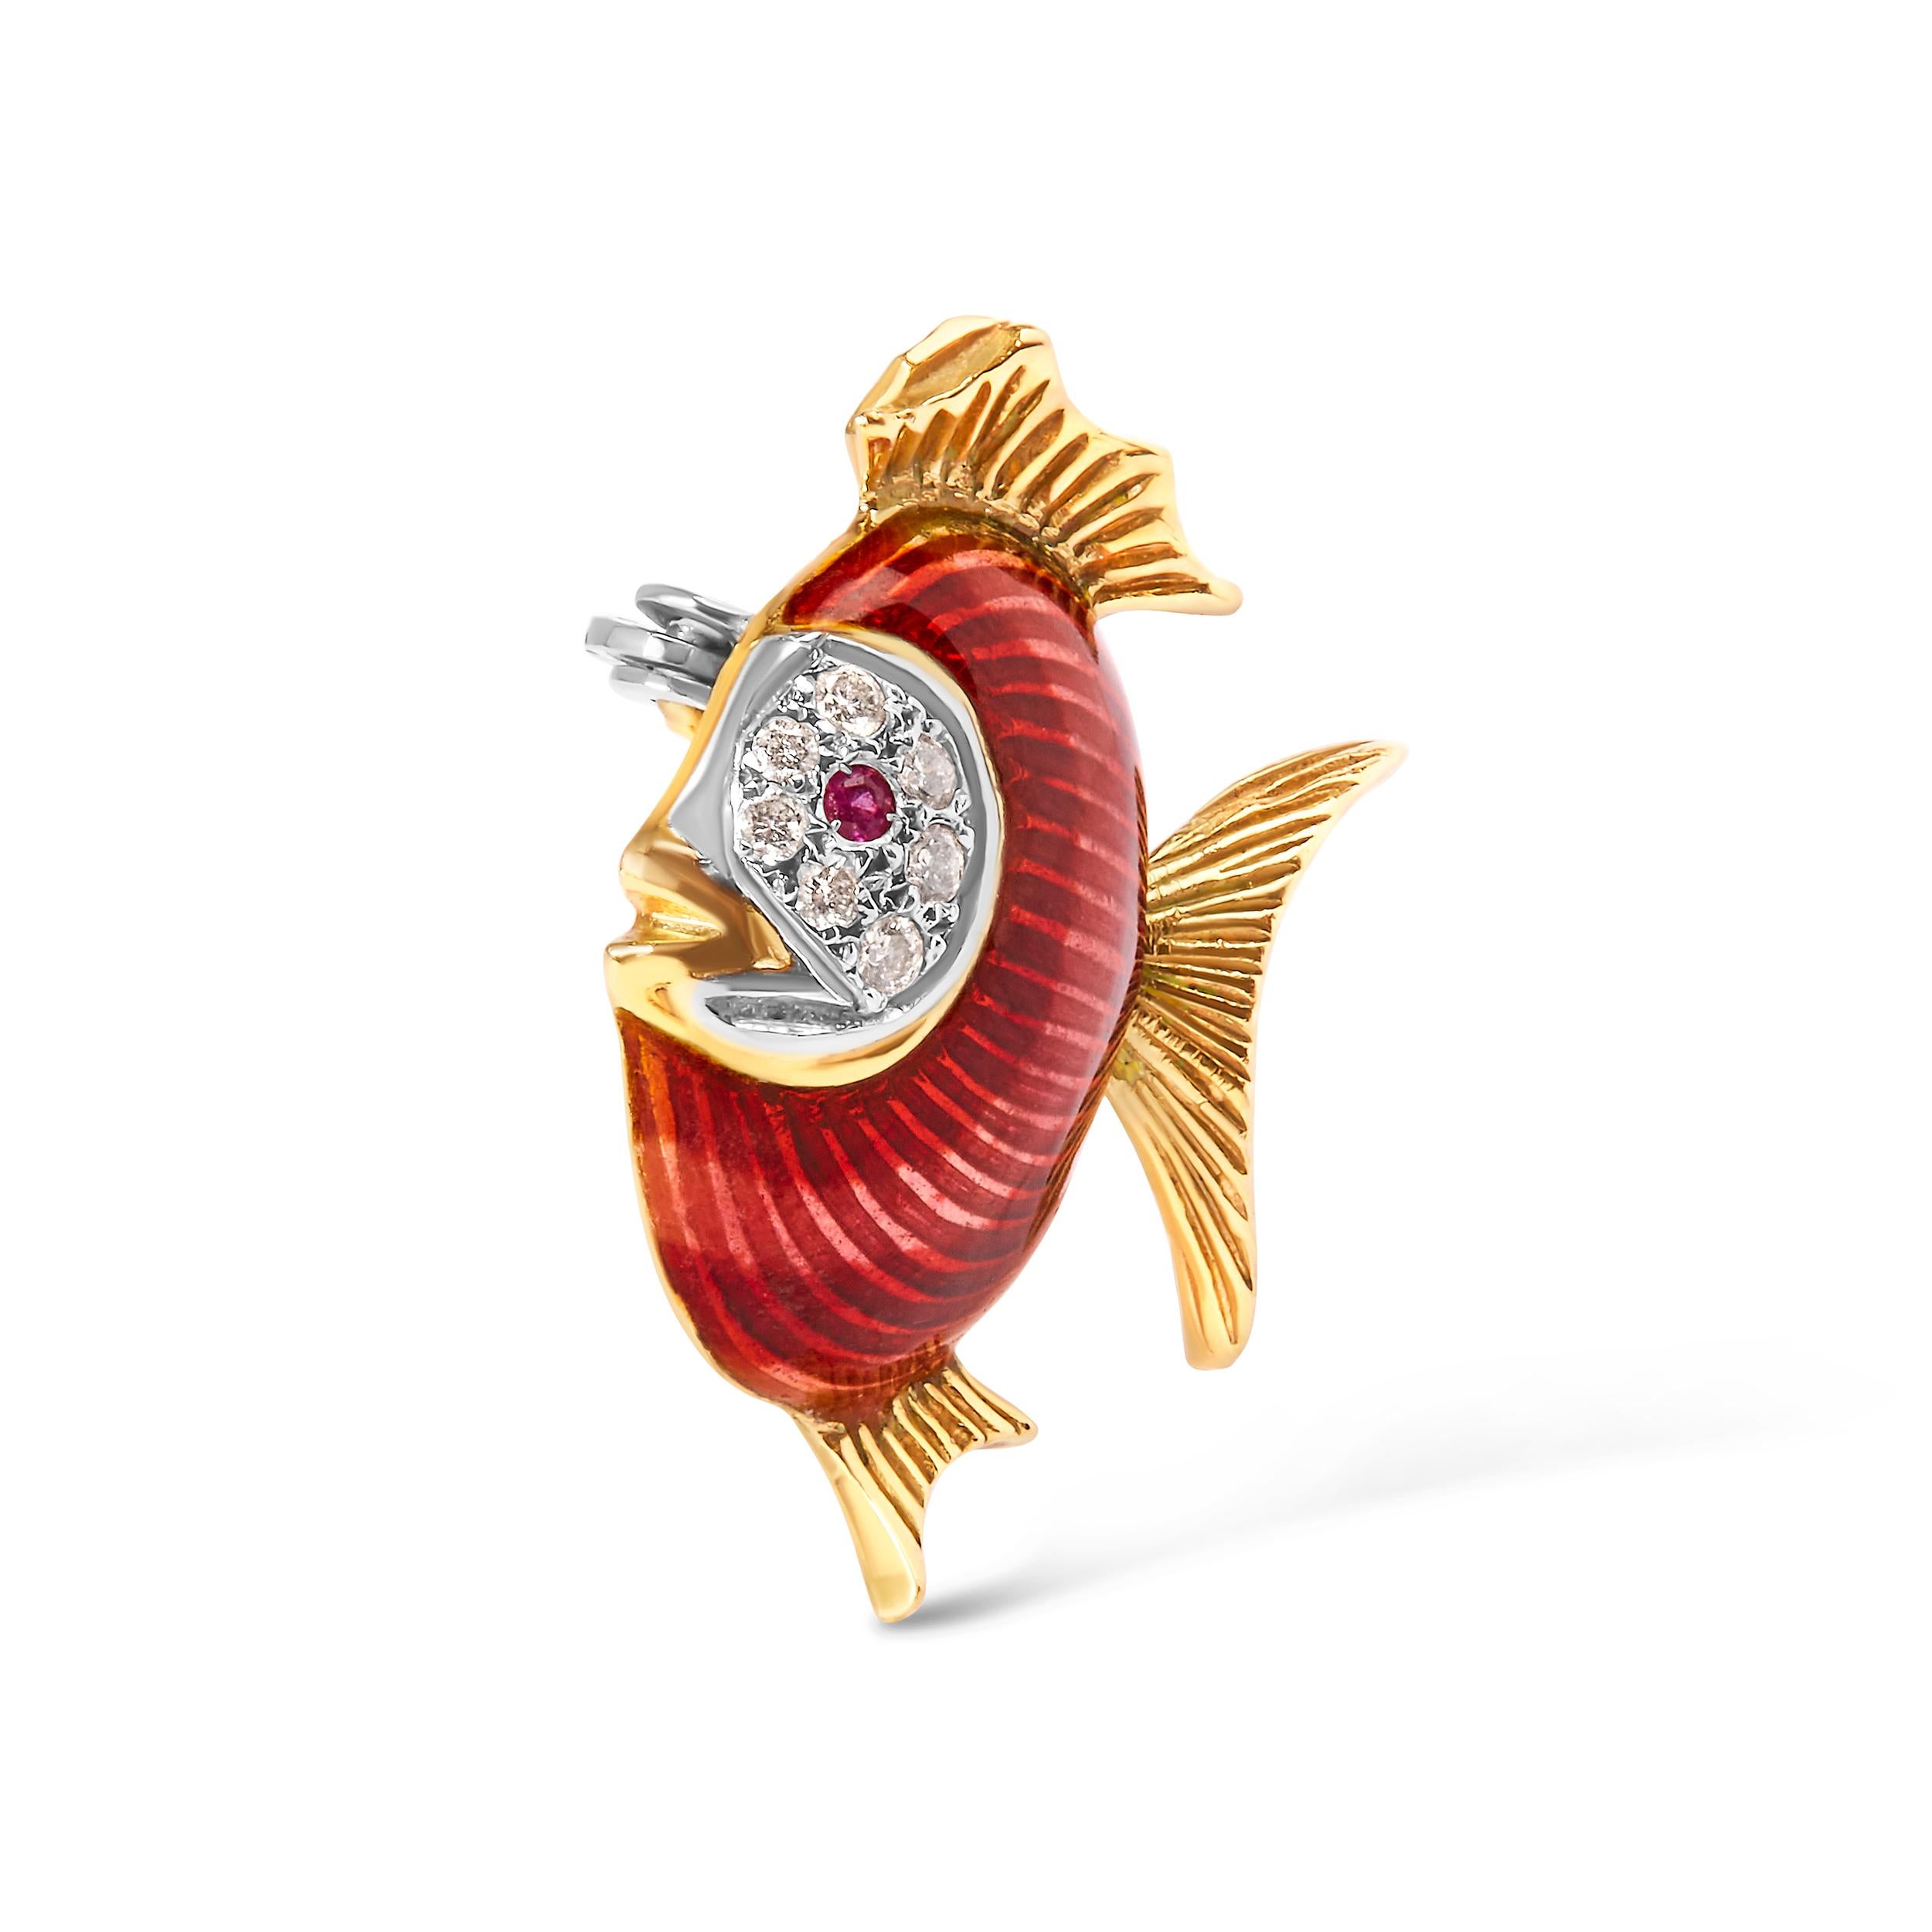 Introducing an exquisite masterpiece of nature's beauty, this 18K Yellow Gold Diamond and Pink Sapphire Parrot Fish Red Enamel Brooch Pin is a true reflection of elegance. With its vibrant red enamel and captivating parrot fish design, it